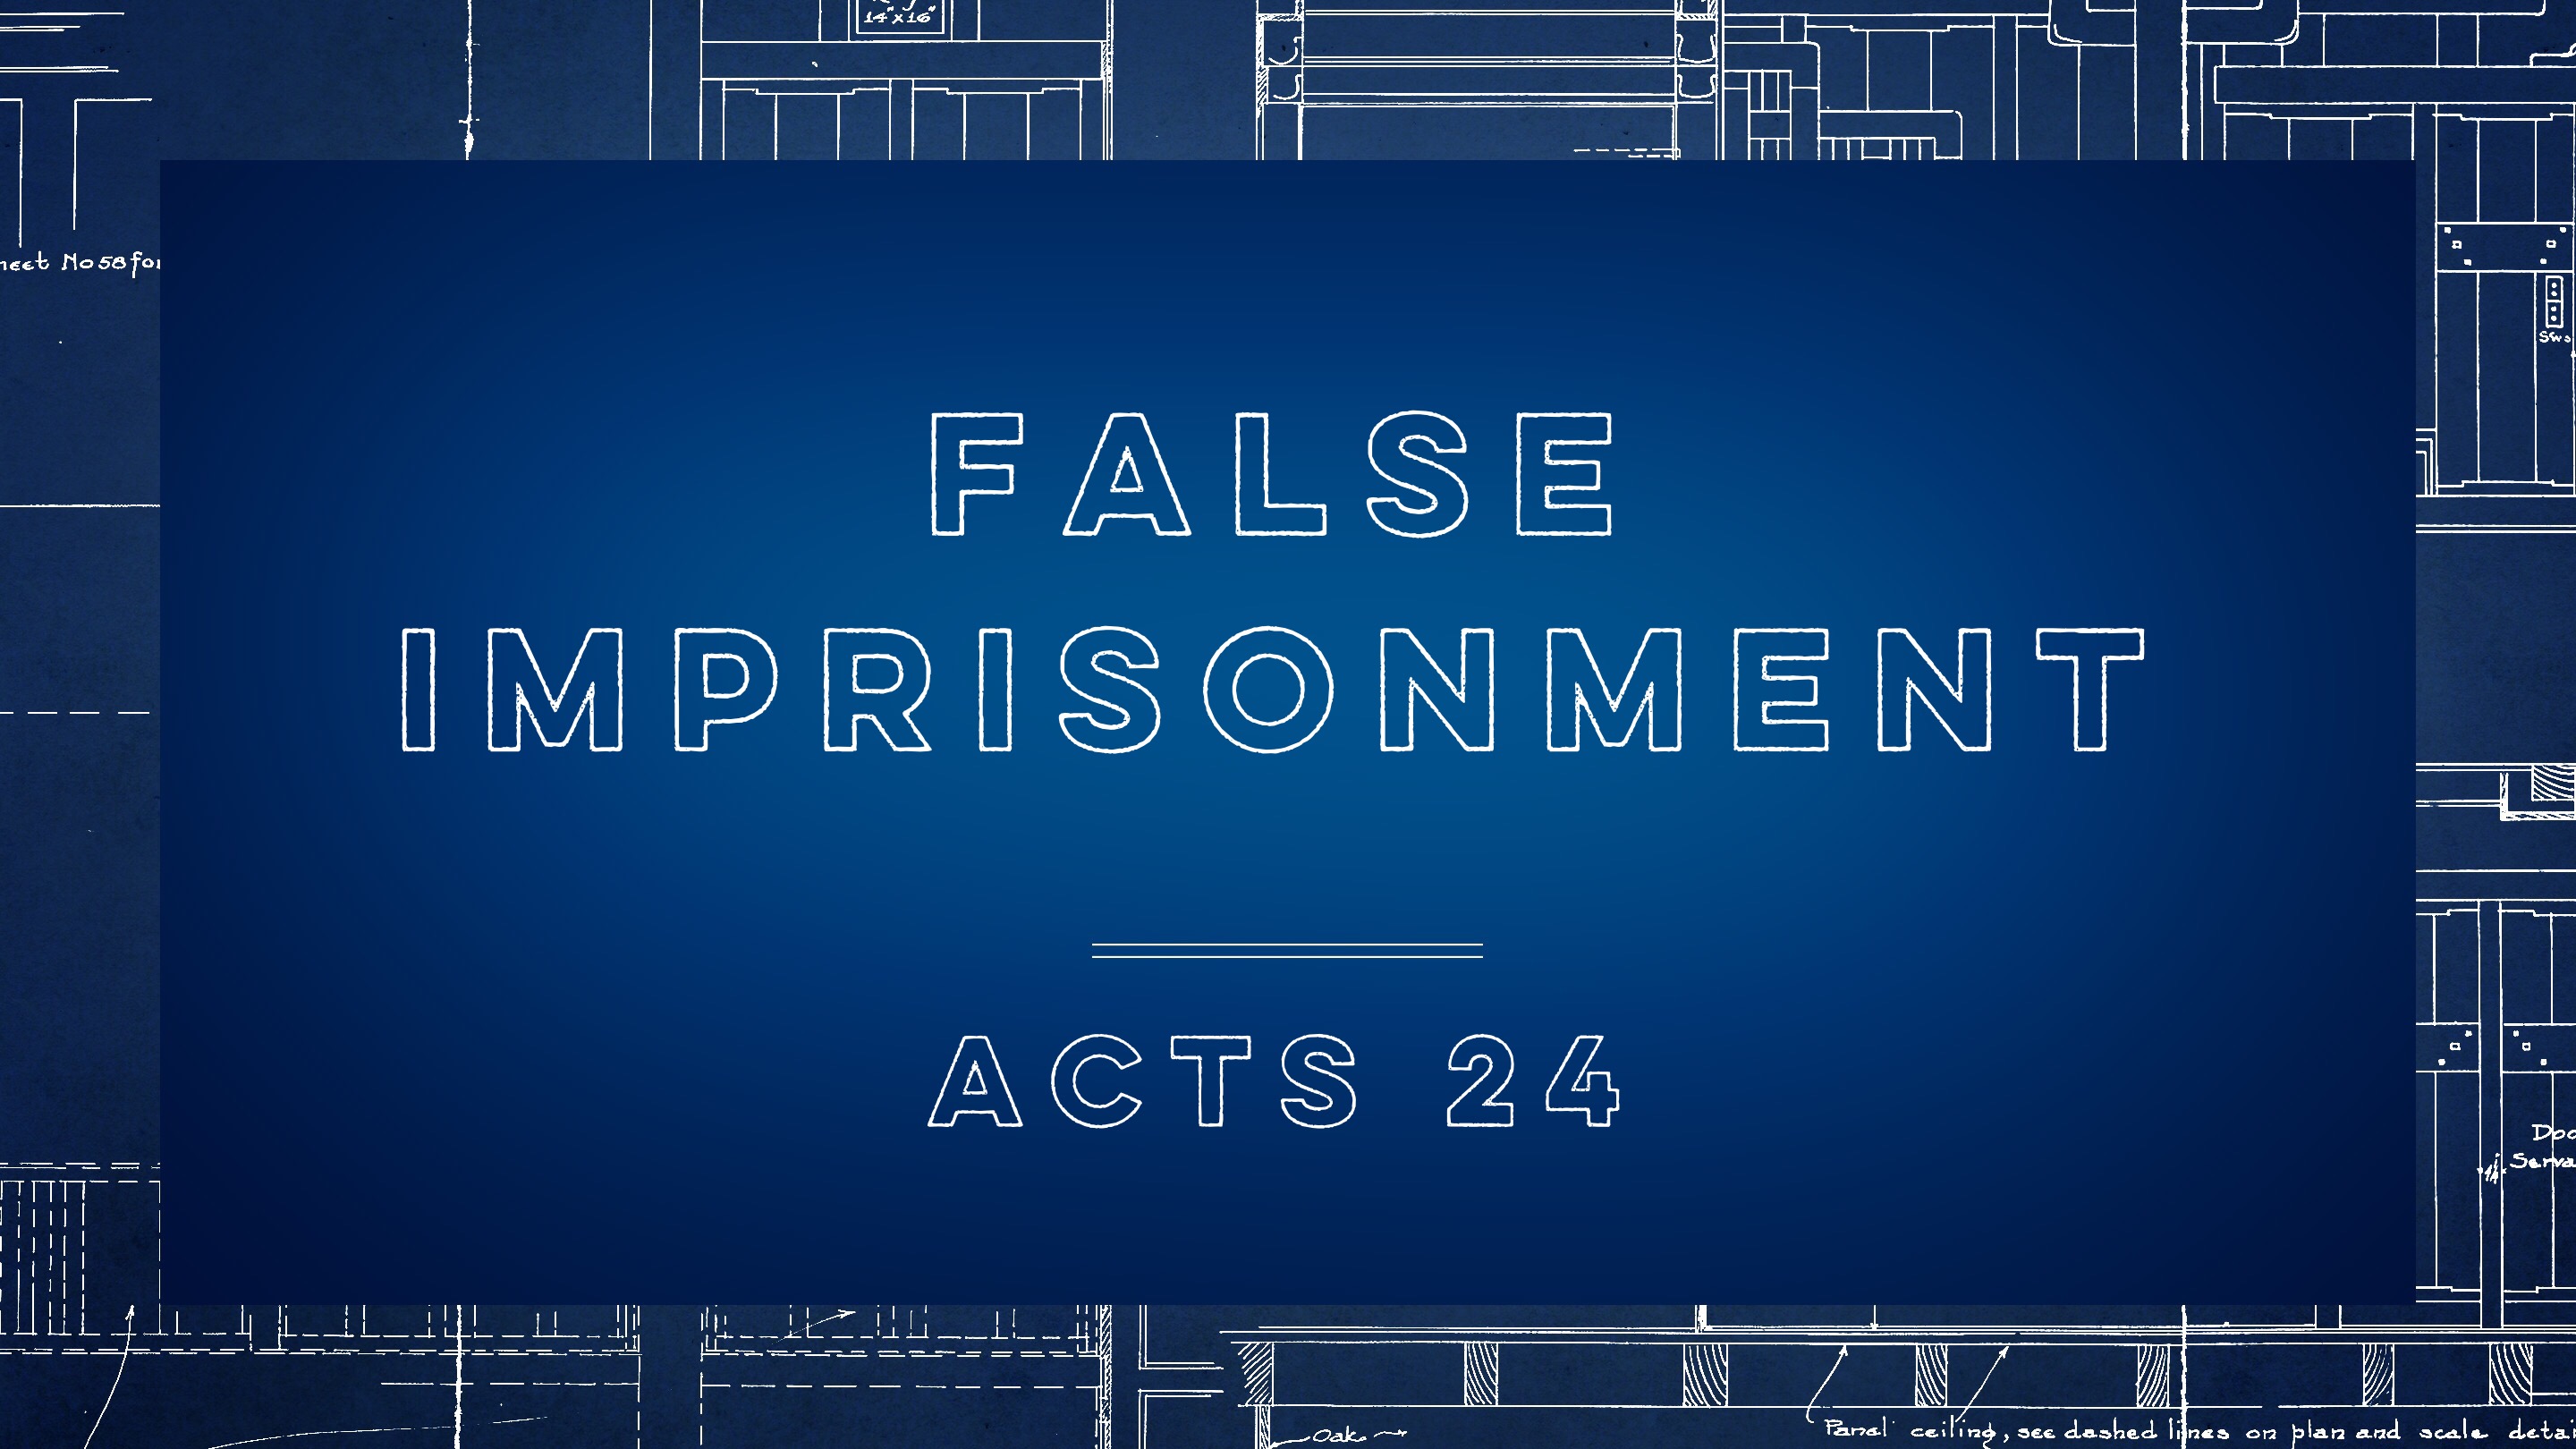 Pastor Will: Acts- False Imprisonment (06-07-15)